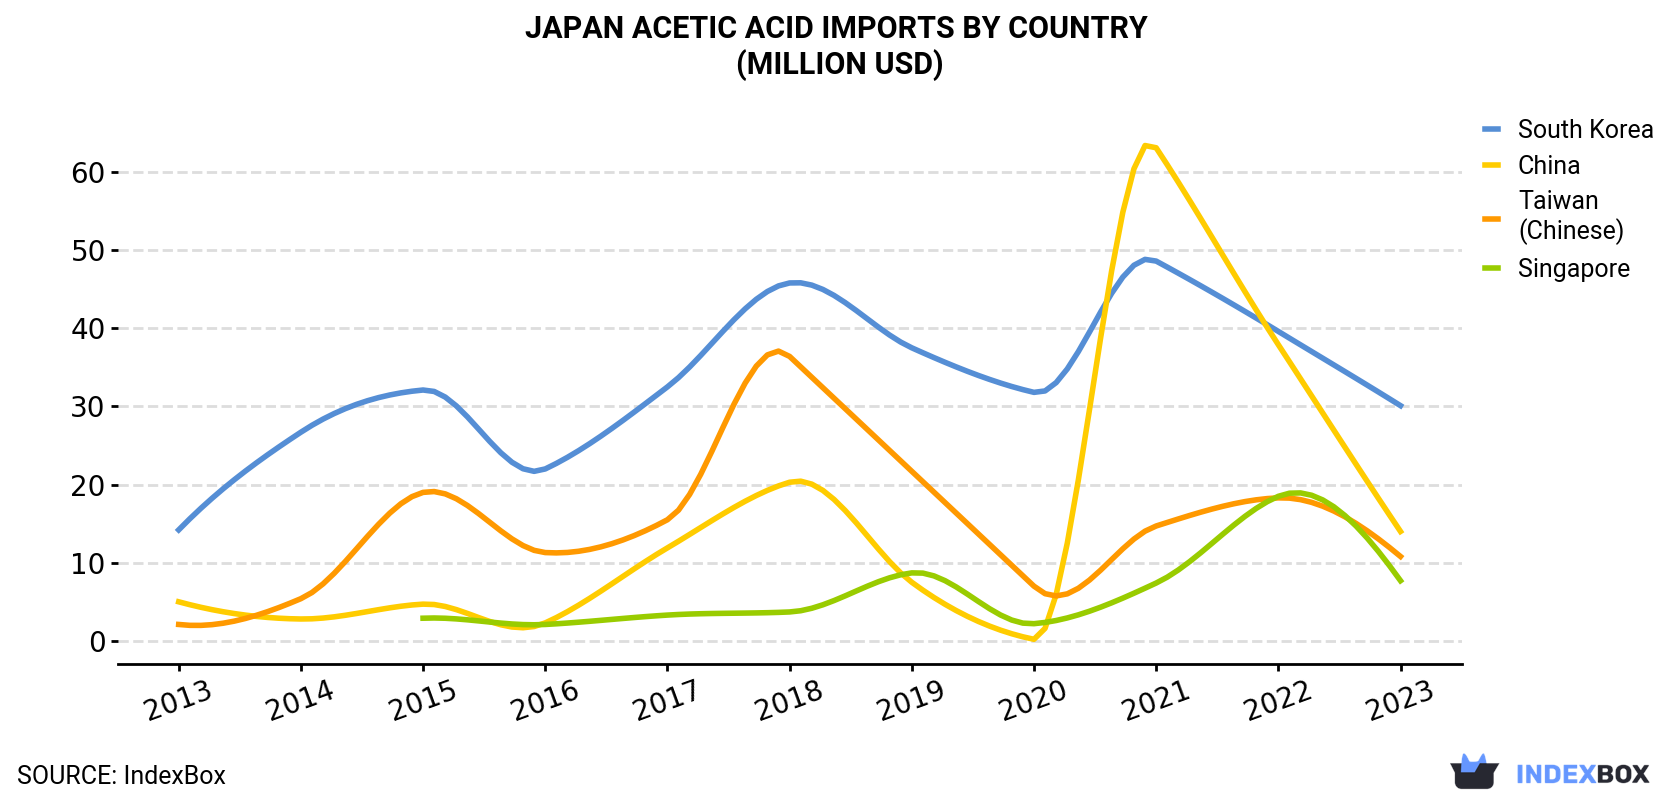 Japan Acetic Acid Imports By Country (Million USD)